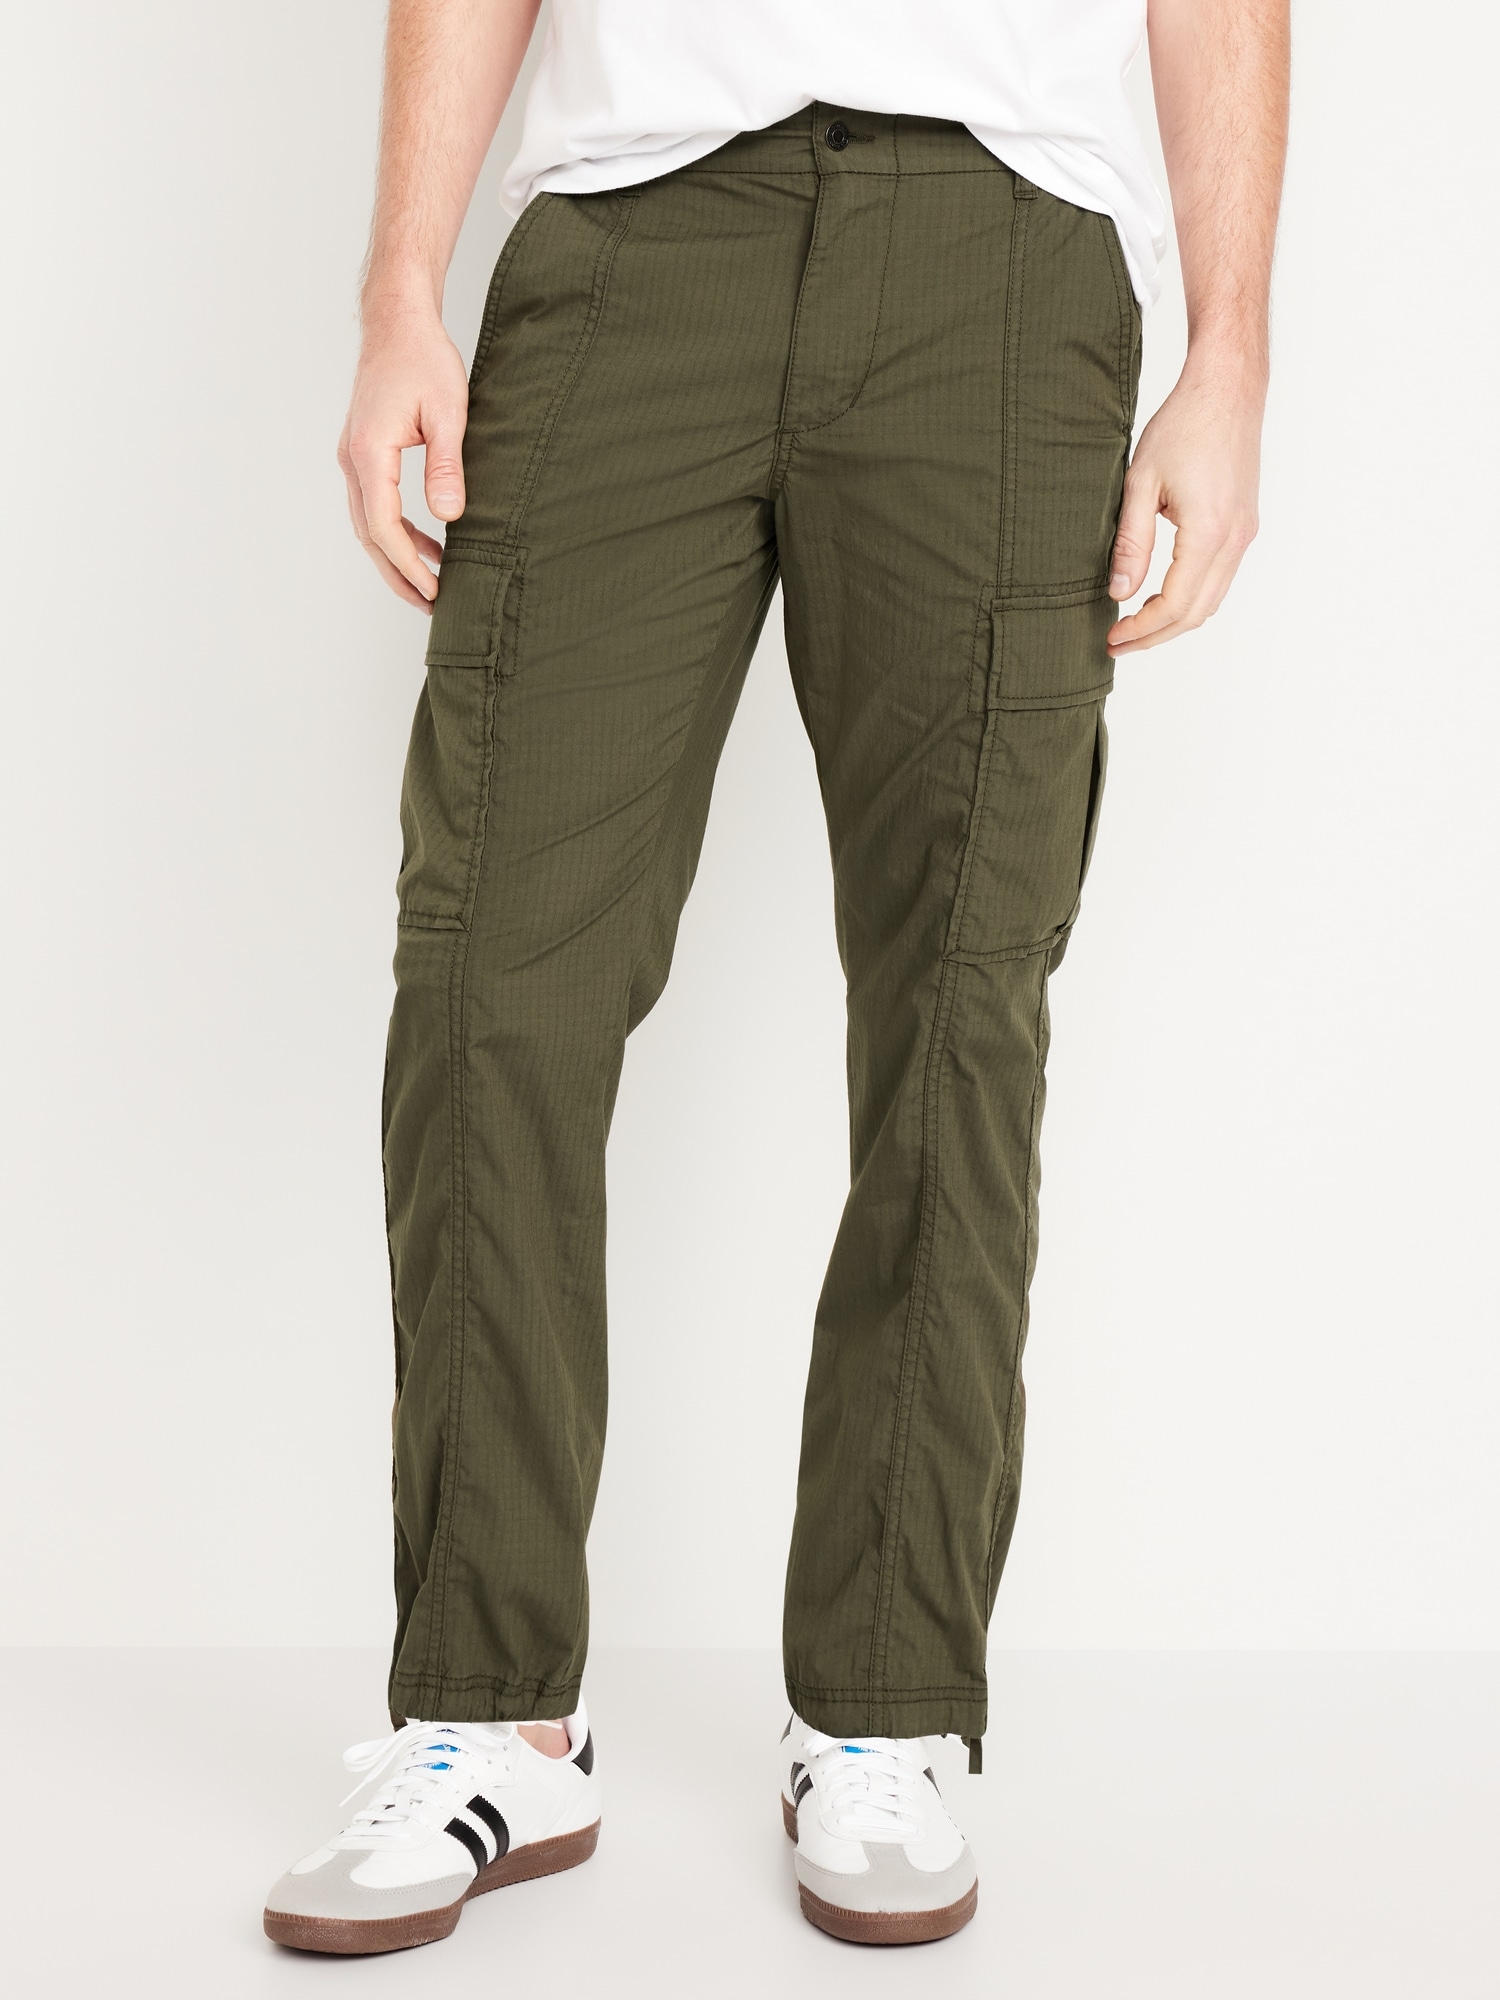 Loose Twill Cargo Pants for Girls